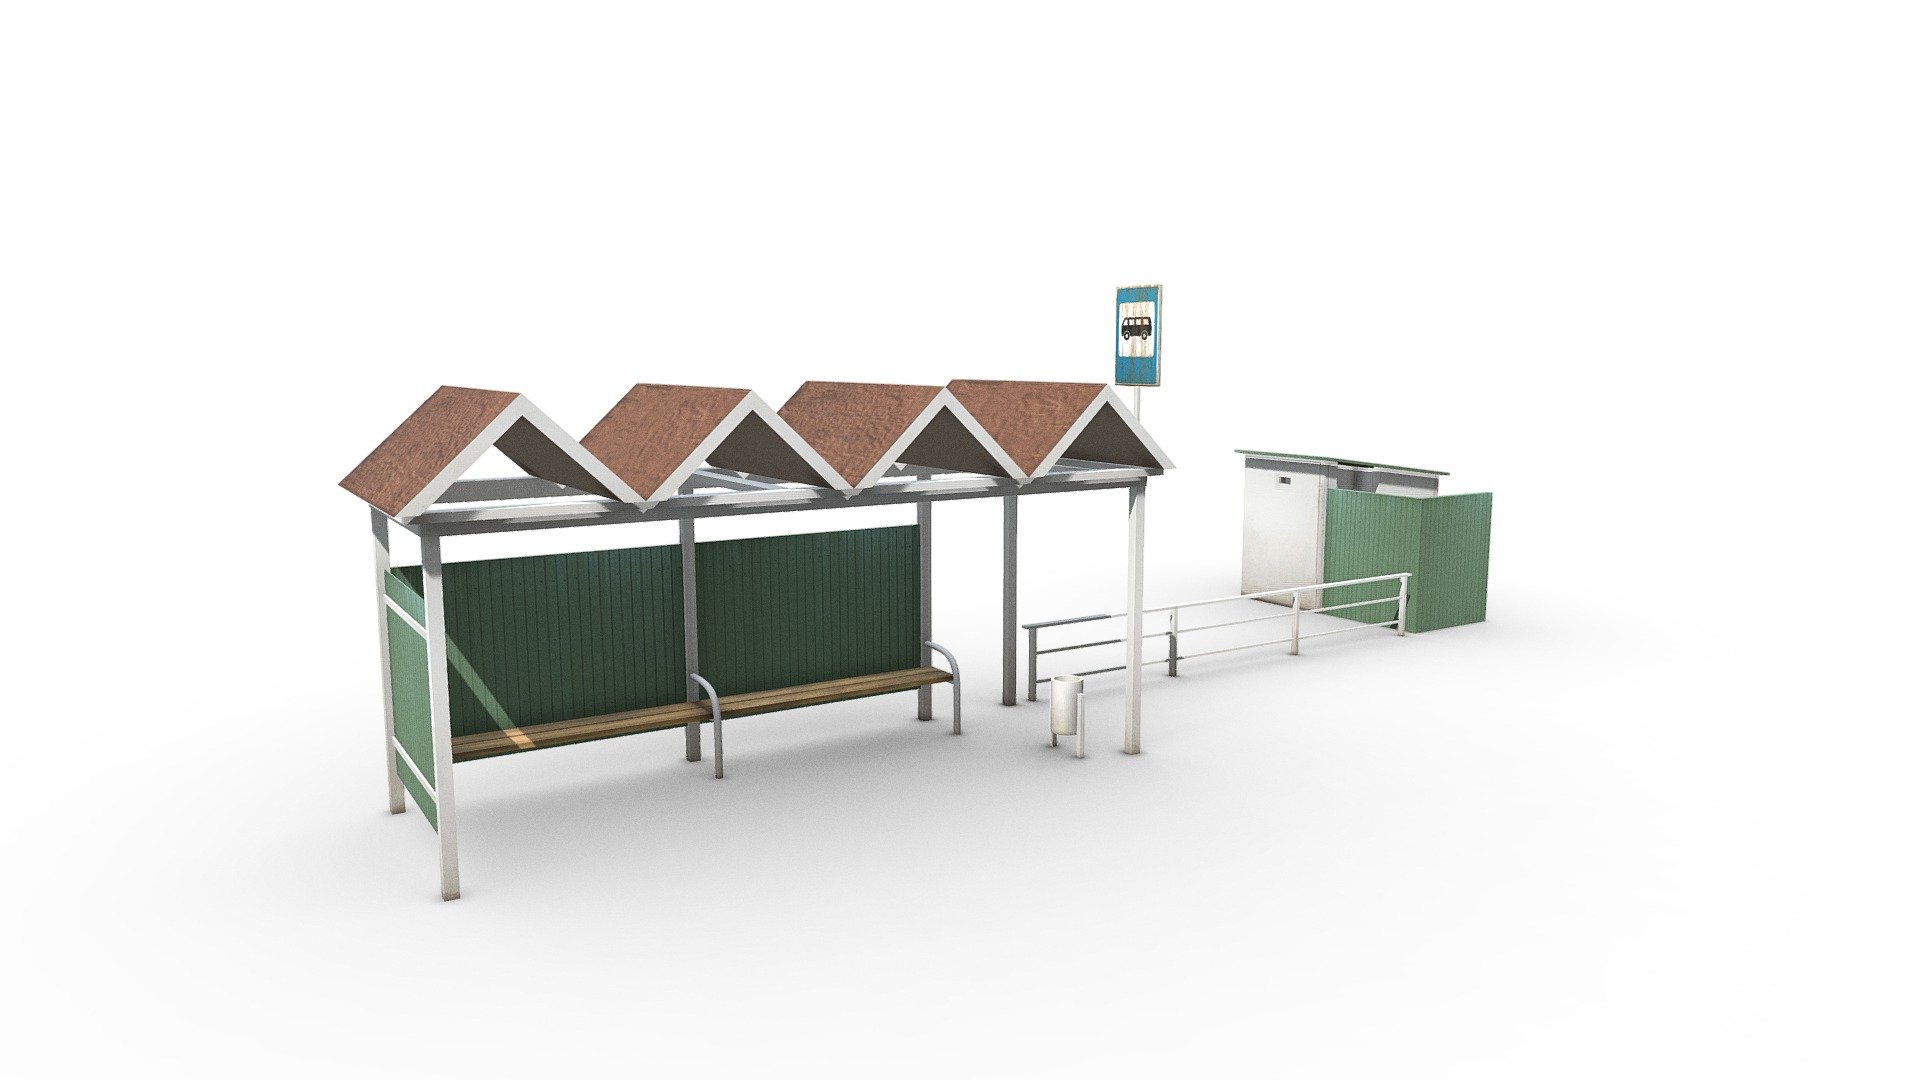 Russian roadside bus stop with toilet Low poly 3D model of the Russian environment from Loginovsky Denis (denlog). This and my other models were created in 3ds max version 2017. Textures included are also created from mi own photos and free images from the Internet. My group is in Contact https://vk.com/club159607022 - Roadside bus stop with toilet - 3D model by Denis Loginovskiy (@denlog2) 3d model